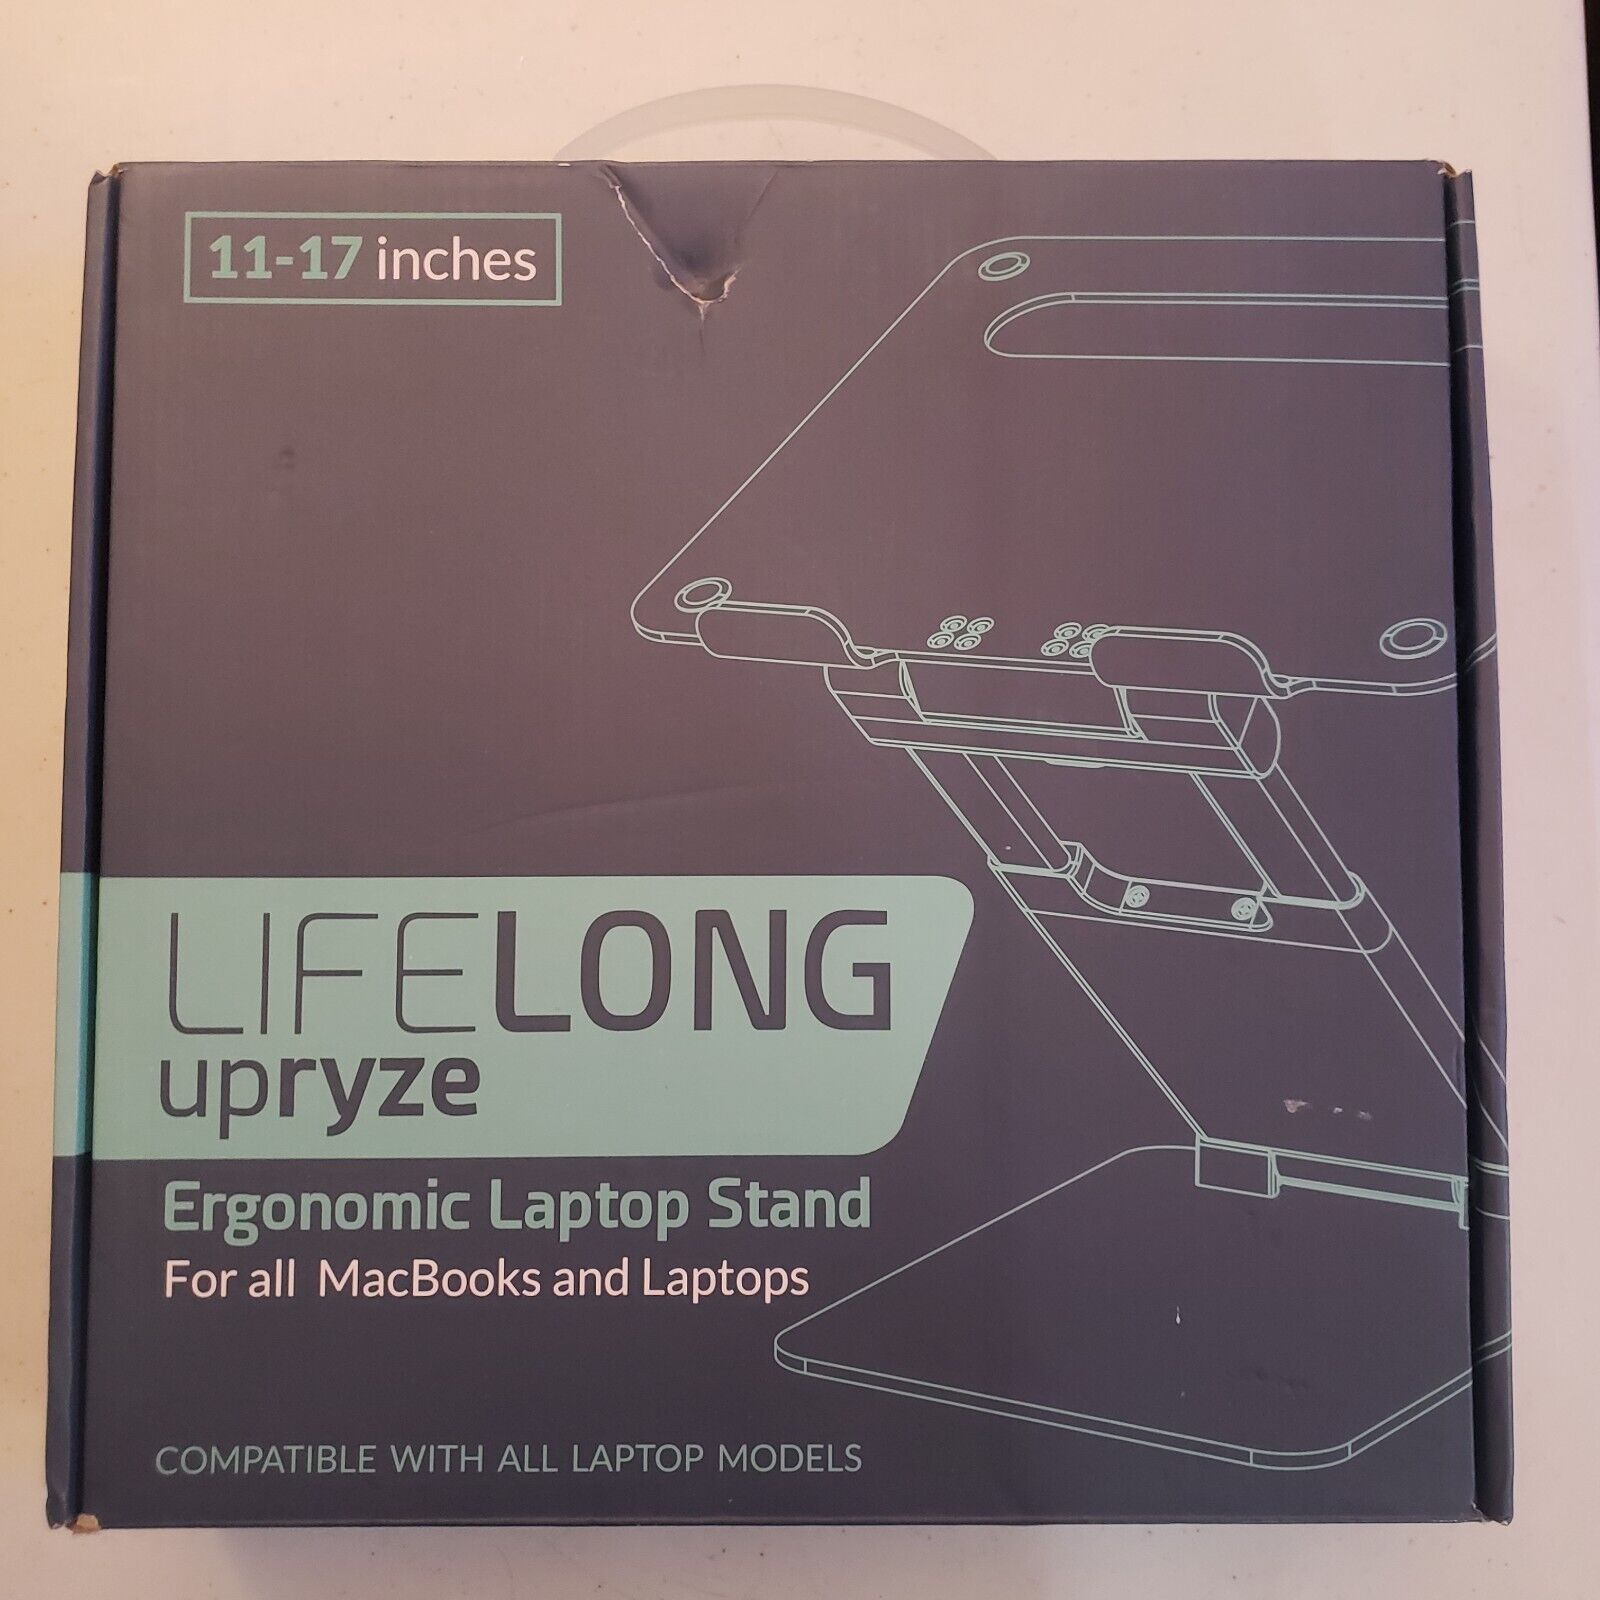 Lifelong UPRYZE Ergonomic Laptop Stand For Desk Adjustable Height Up To 11- 17in